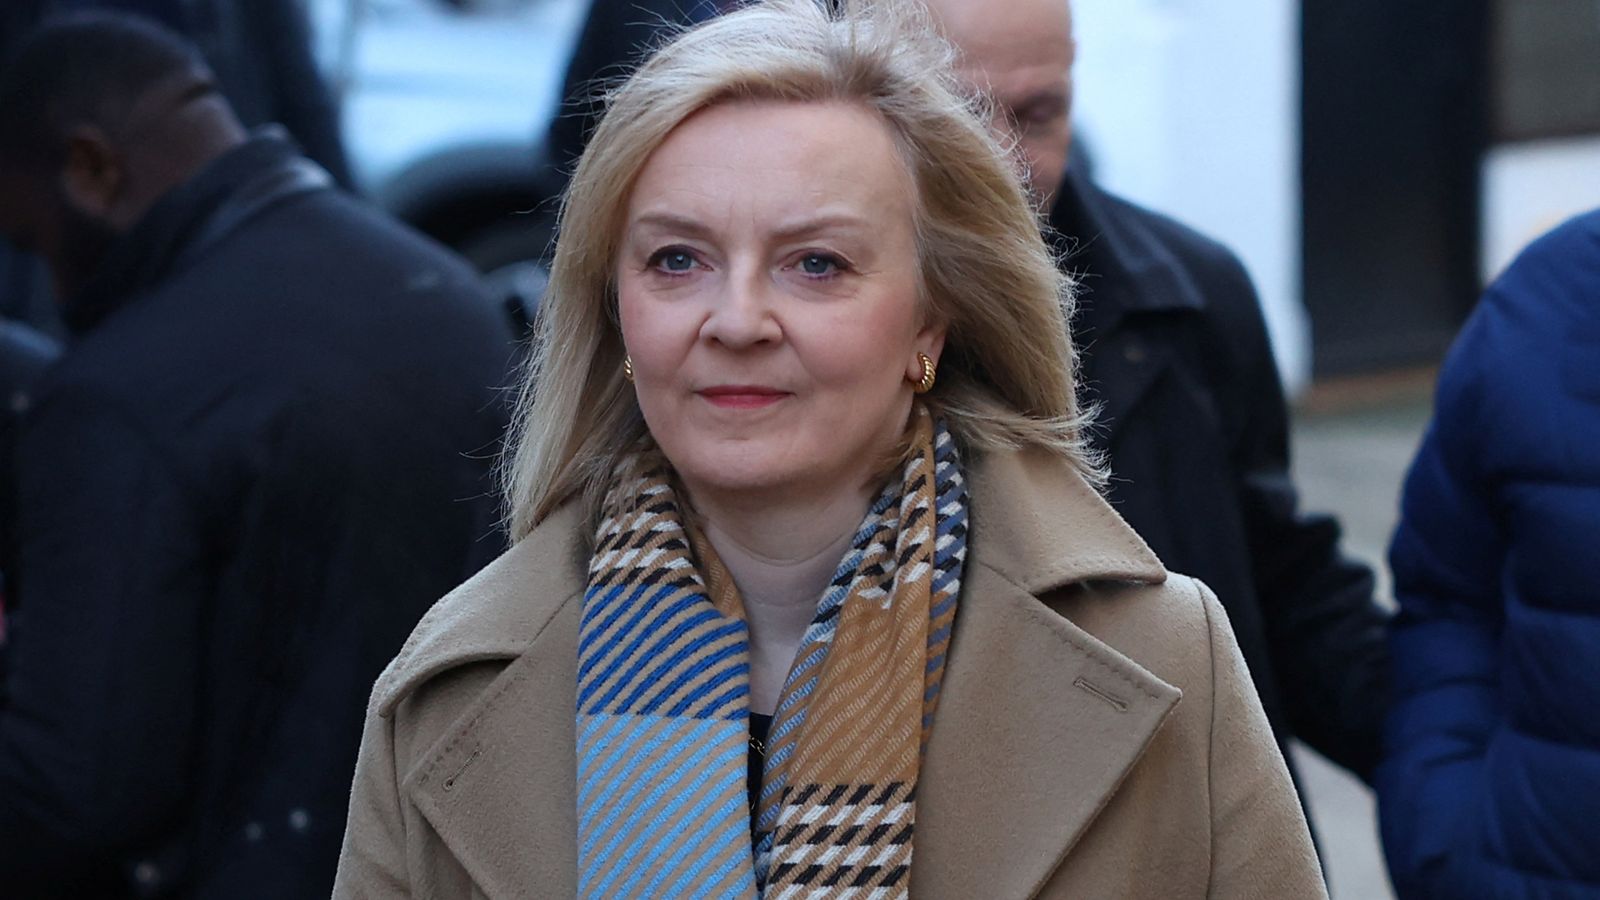 Liz Truss was 'ecstatic' with mini-budget plan and claims Number 10 infested with fleas in new memoir